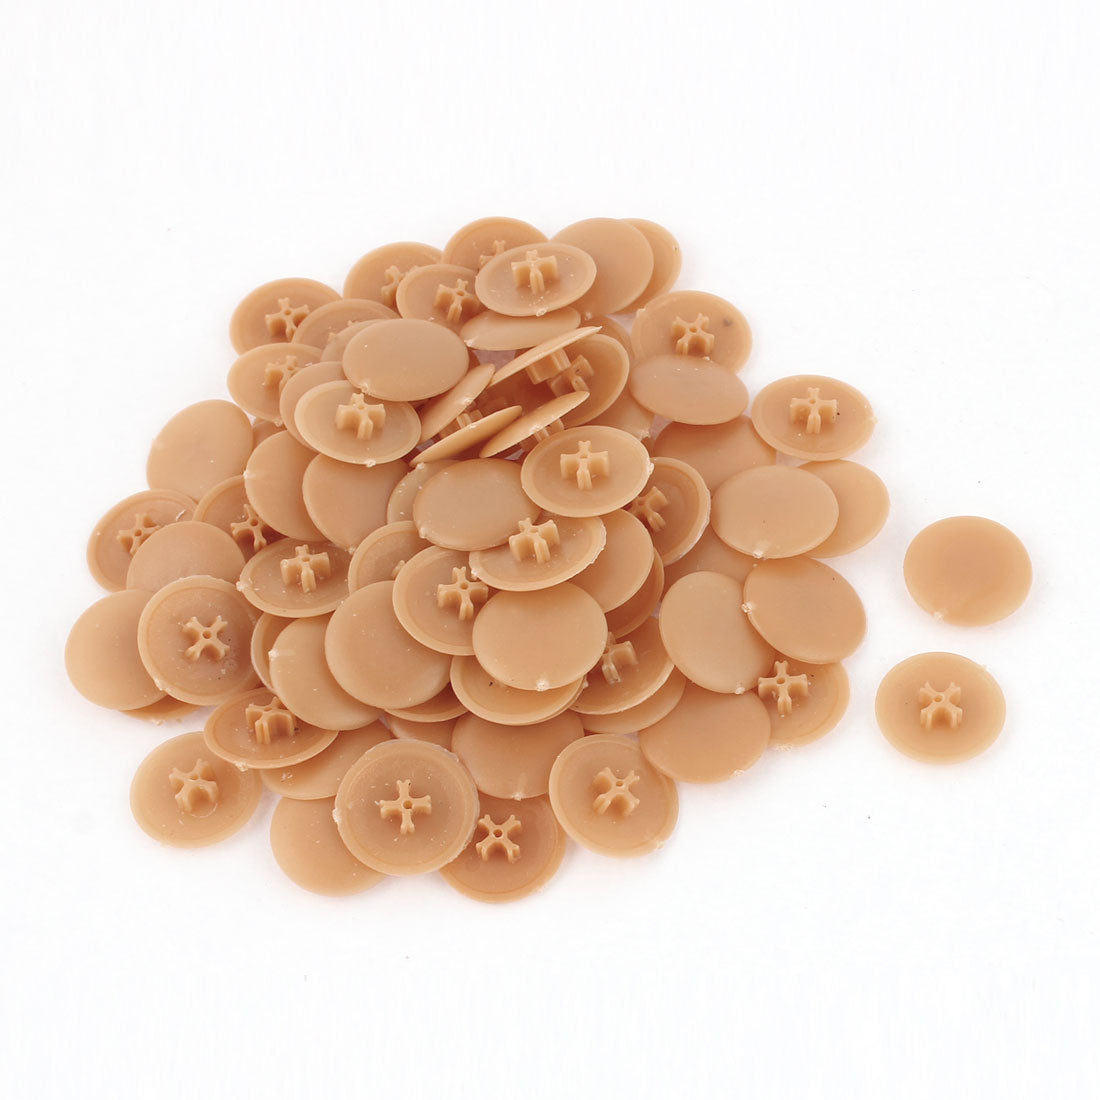 uxcell Uxcell 17mm Dia 4mm Thickness Plastic Round Shape Phillips Screw Cap Cover Tan 100pcs